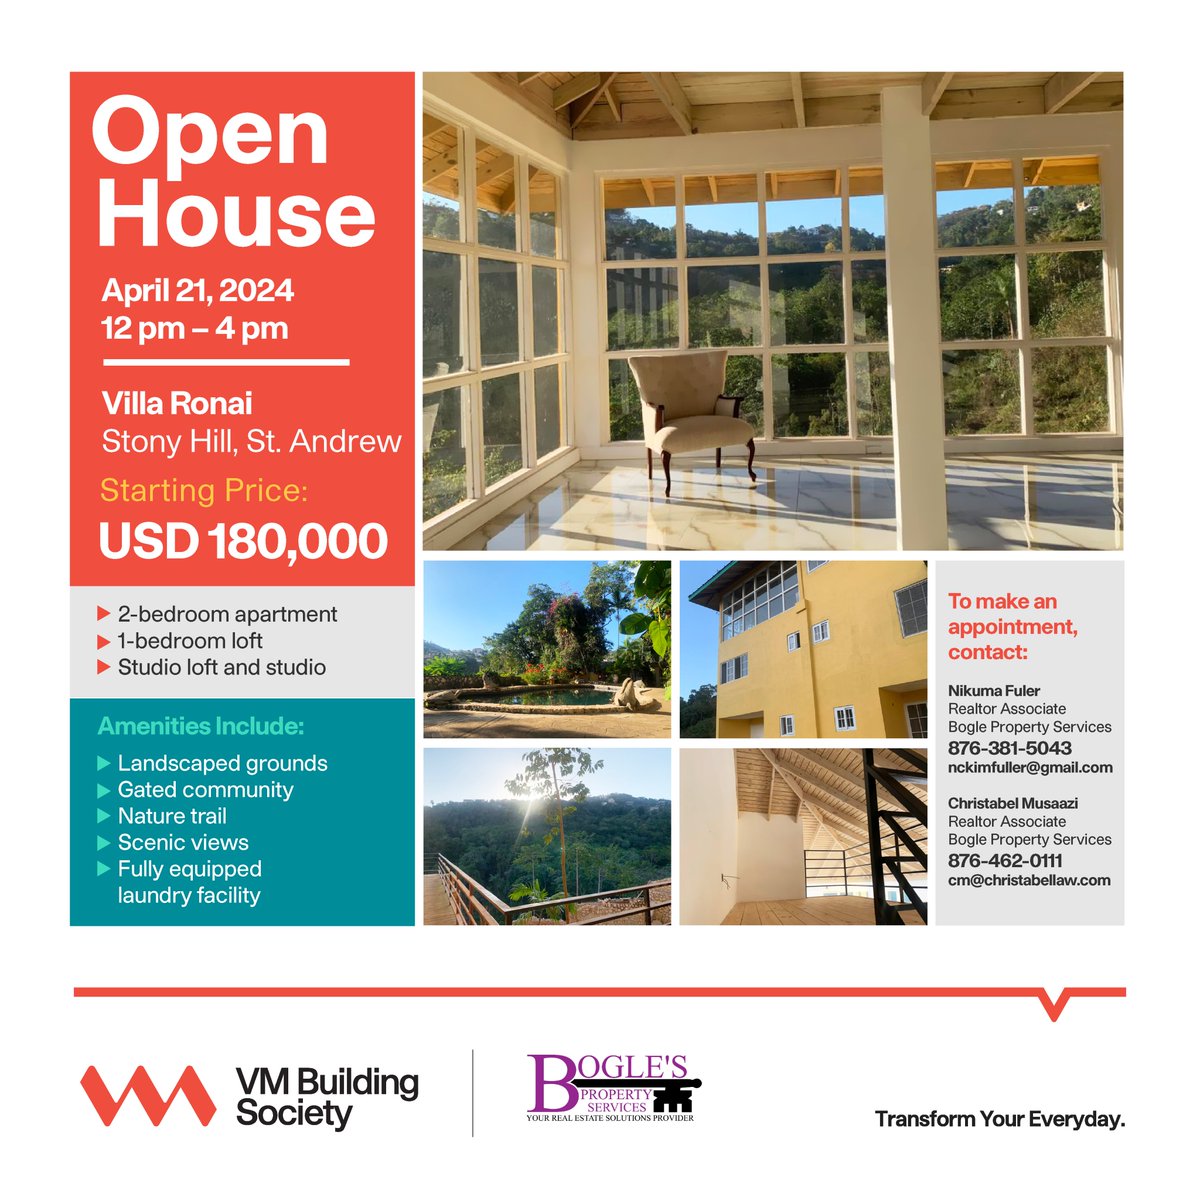 Join the VMBS team along with Bogle's Property Services this Saturday, for an open house at Villa Ronai (Stony Hill, St. Andrew). View what could be your new home from 12 pm to 4 pm. Make your appointment today (see image for details). #VMBS #realestate #openhouse